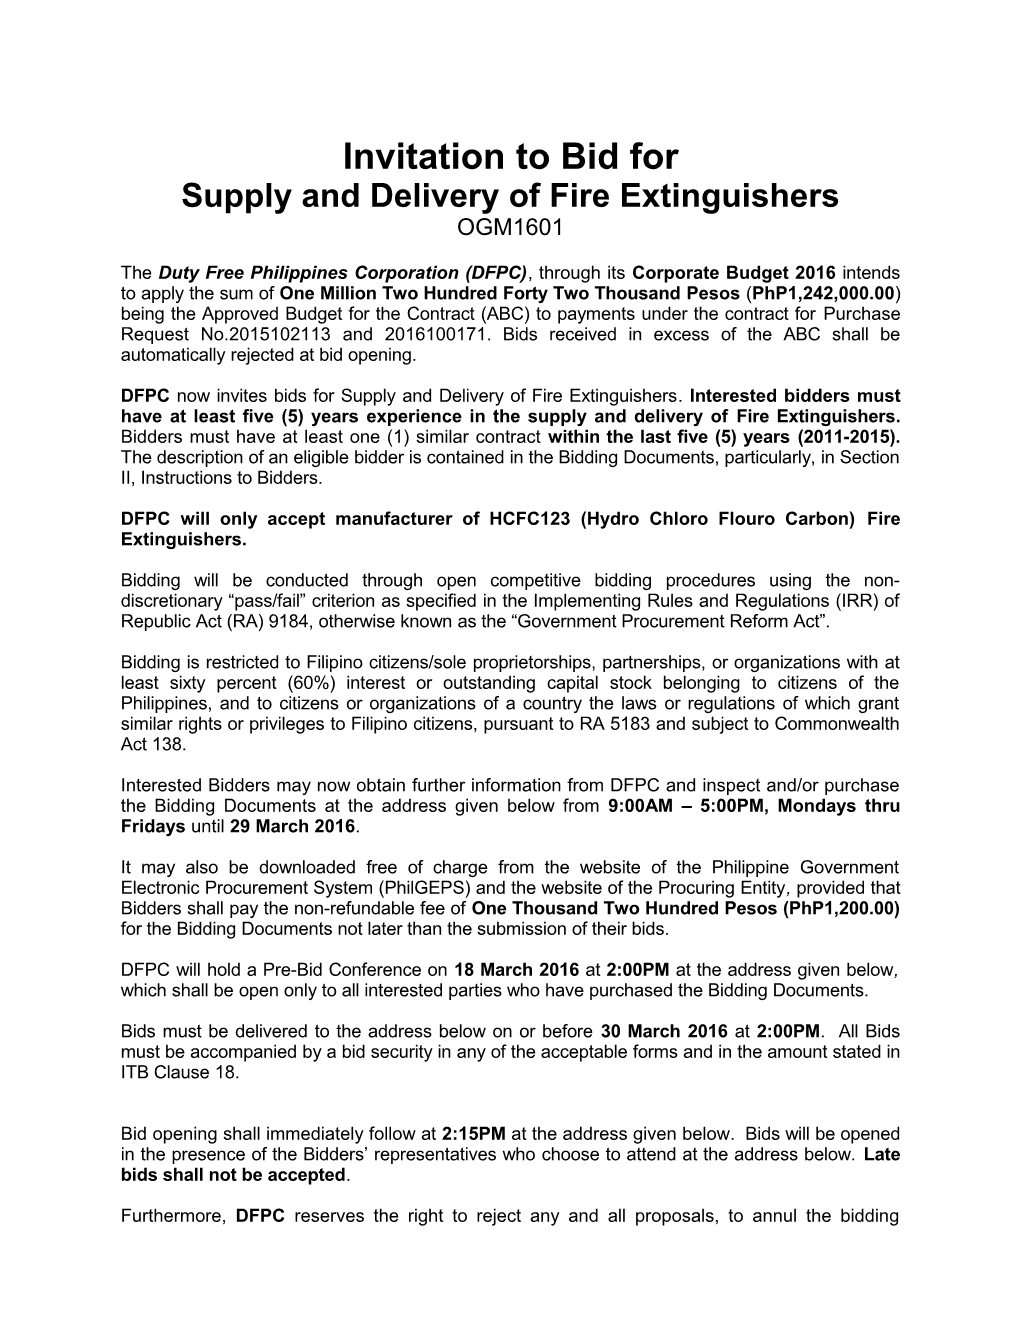 Supply and Delivery of Fire Extinguishers